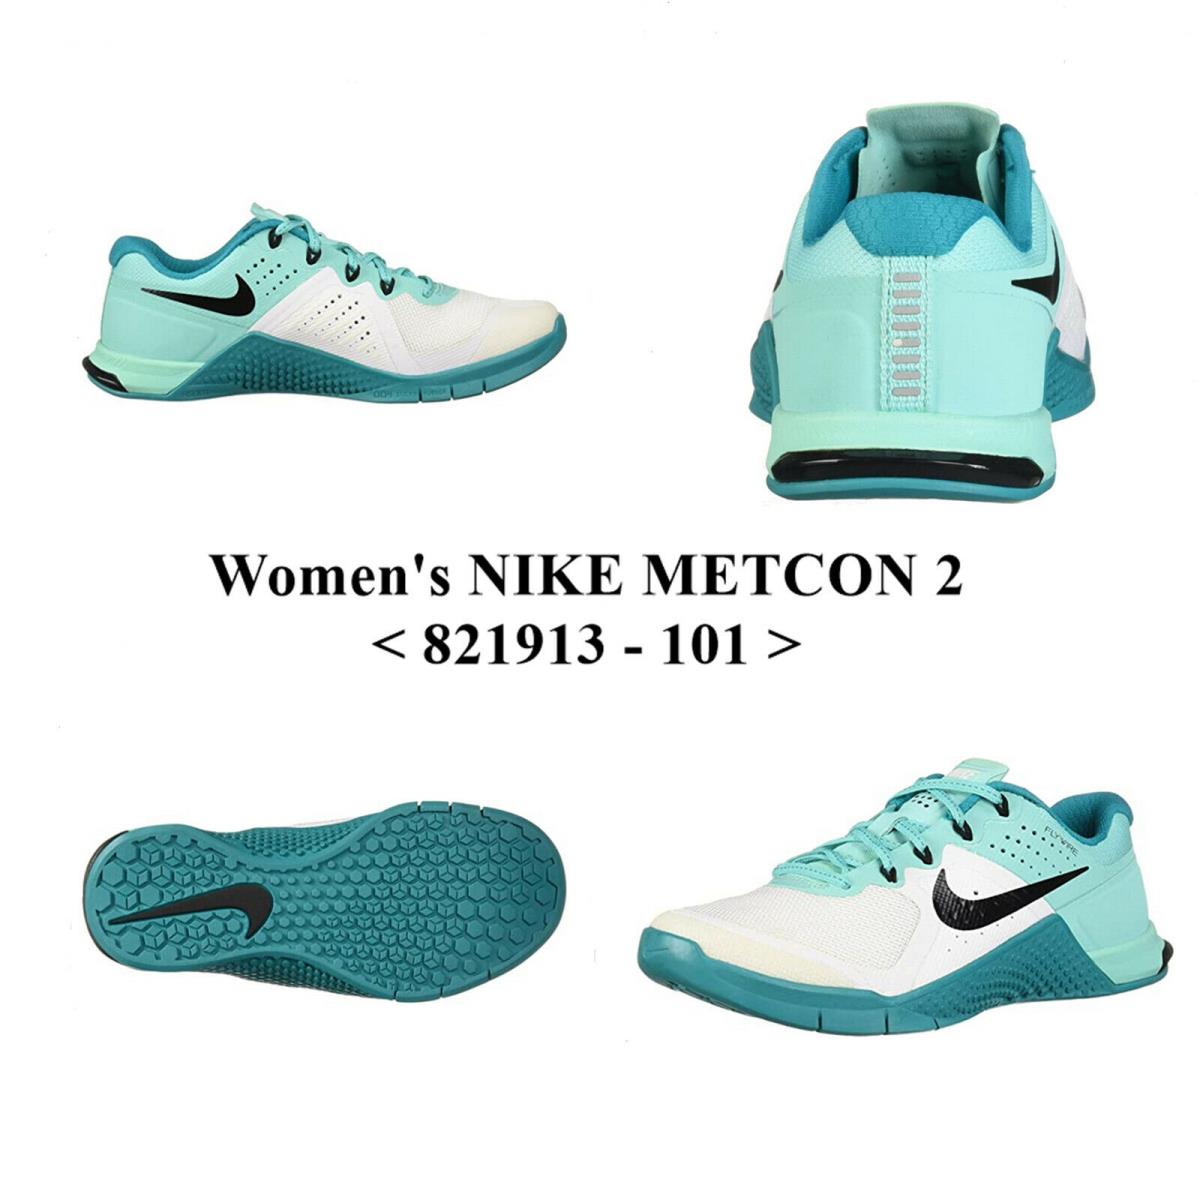 Women`s Nike Metcon 2 <821913 - 101> Training Shoes.new with Box